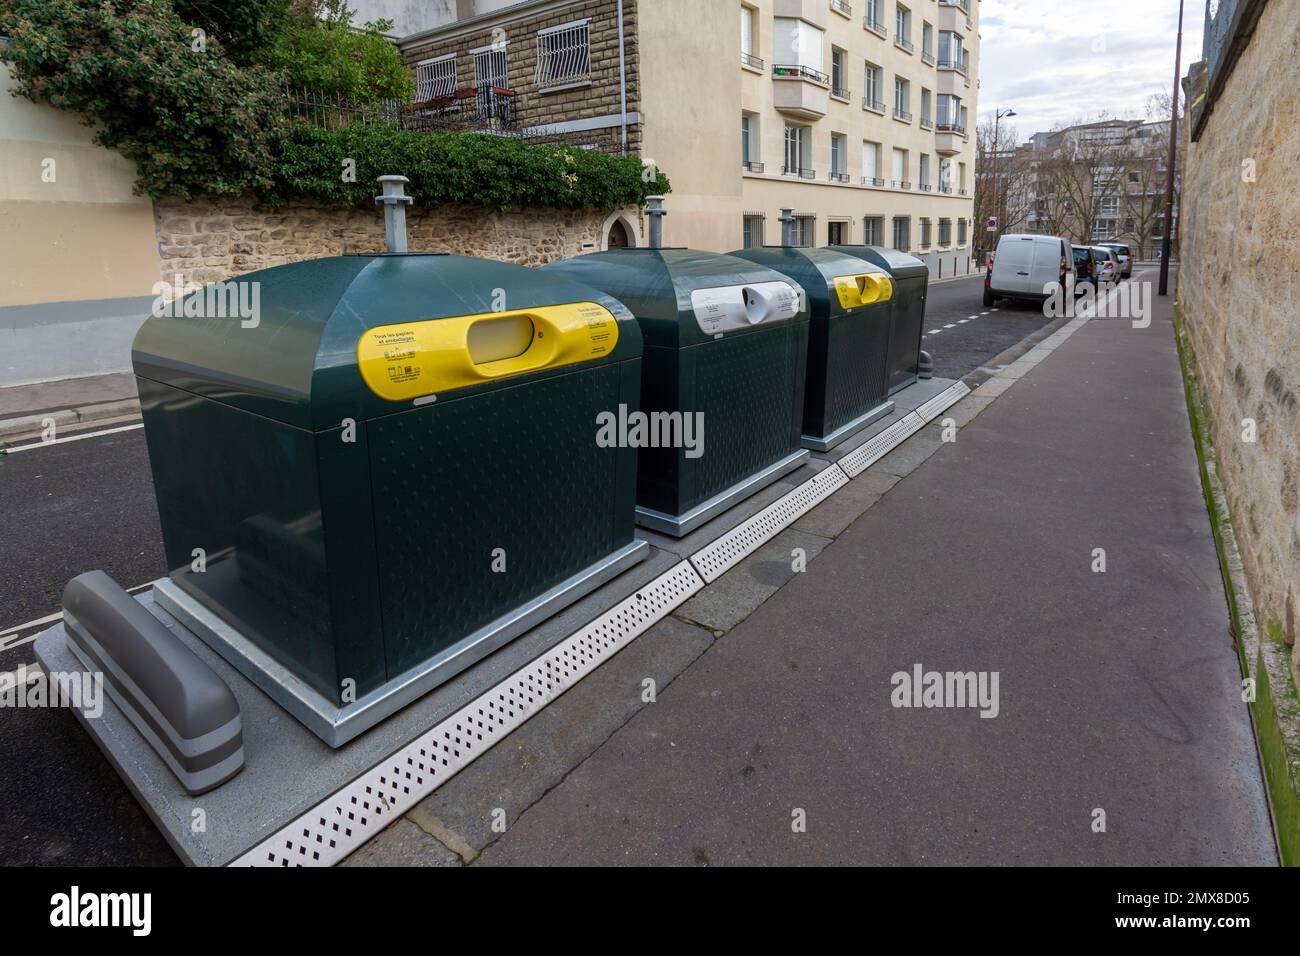 Waste recovery and sorting containers for recycling packaging and cardboard as well as glass objects in a street in Paris, France Stock Photo